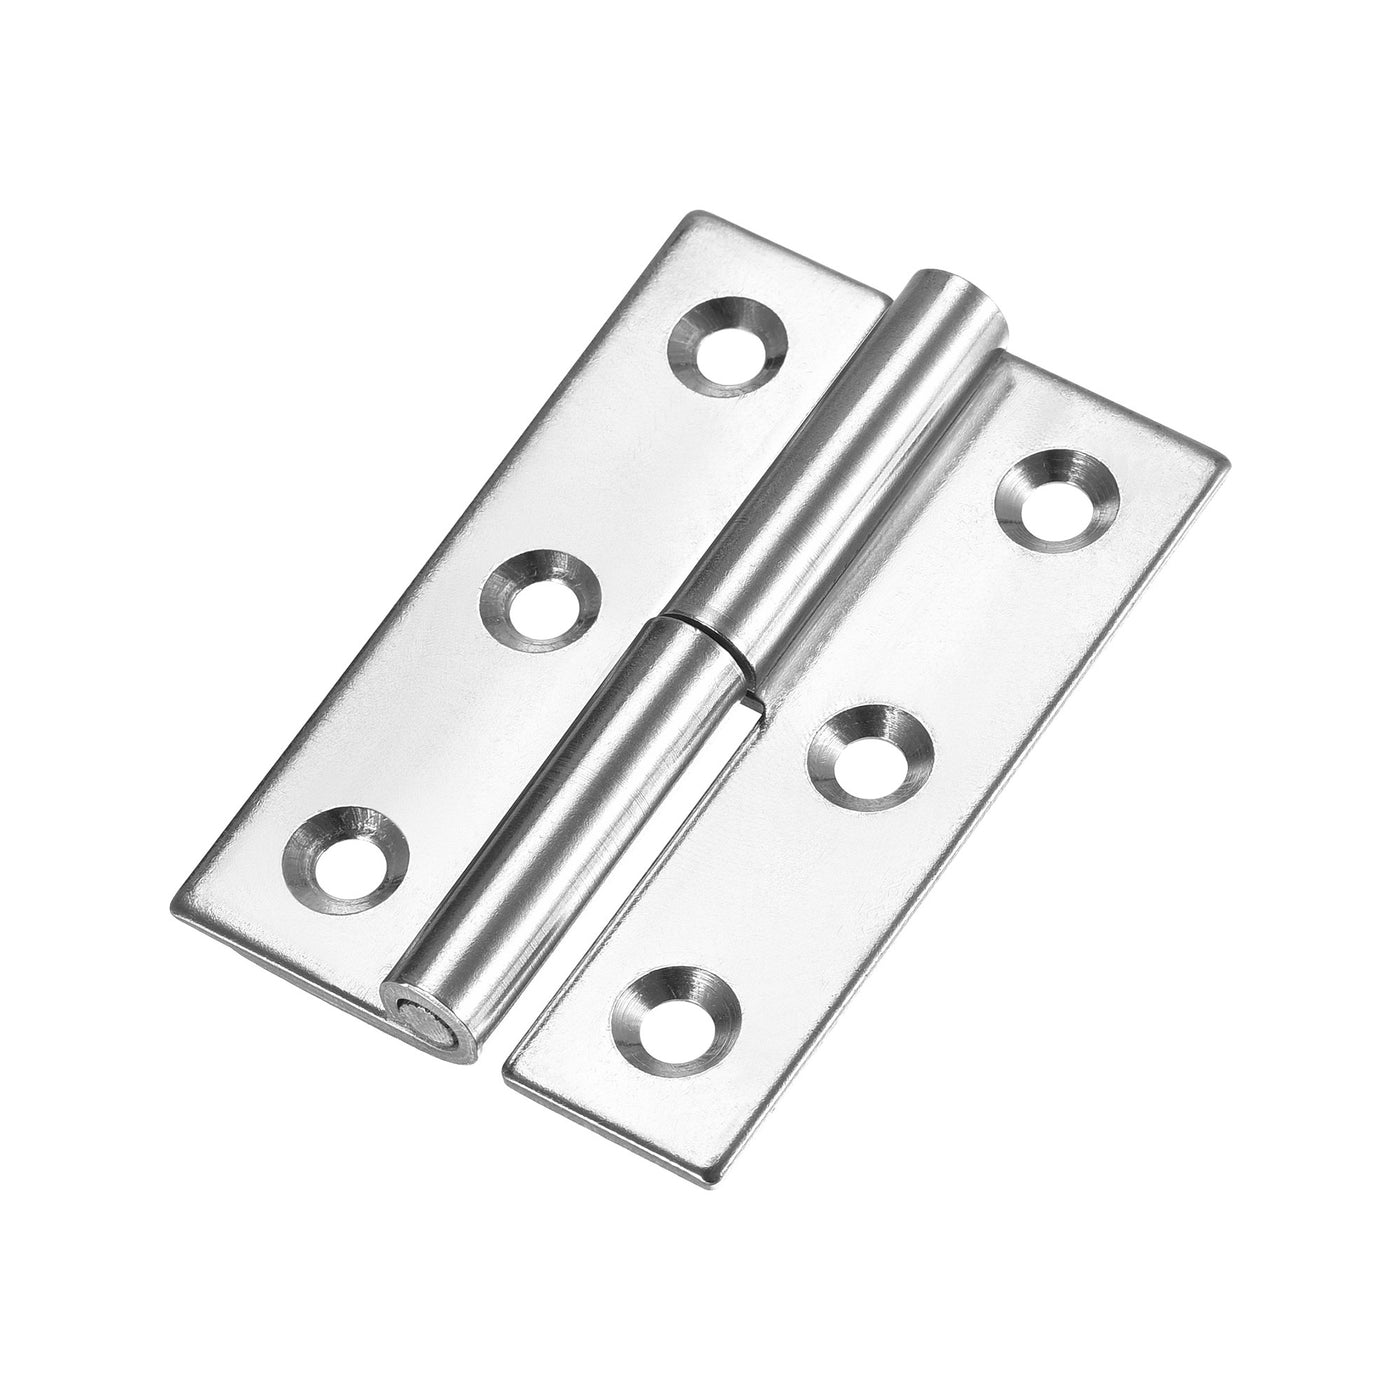 uxcell Uxcell Lift Off Hinge , Right Handedness Mini Stainless Steel Hinge Detachable Slip Joint Small Flag Hinges 75mm Long 50mm Open Width